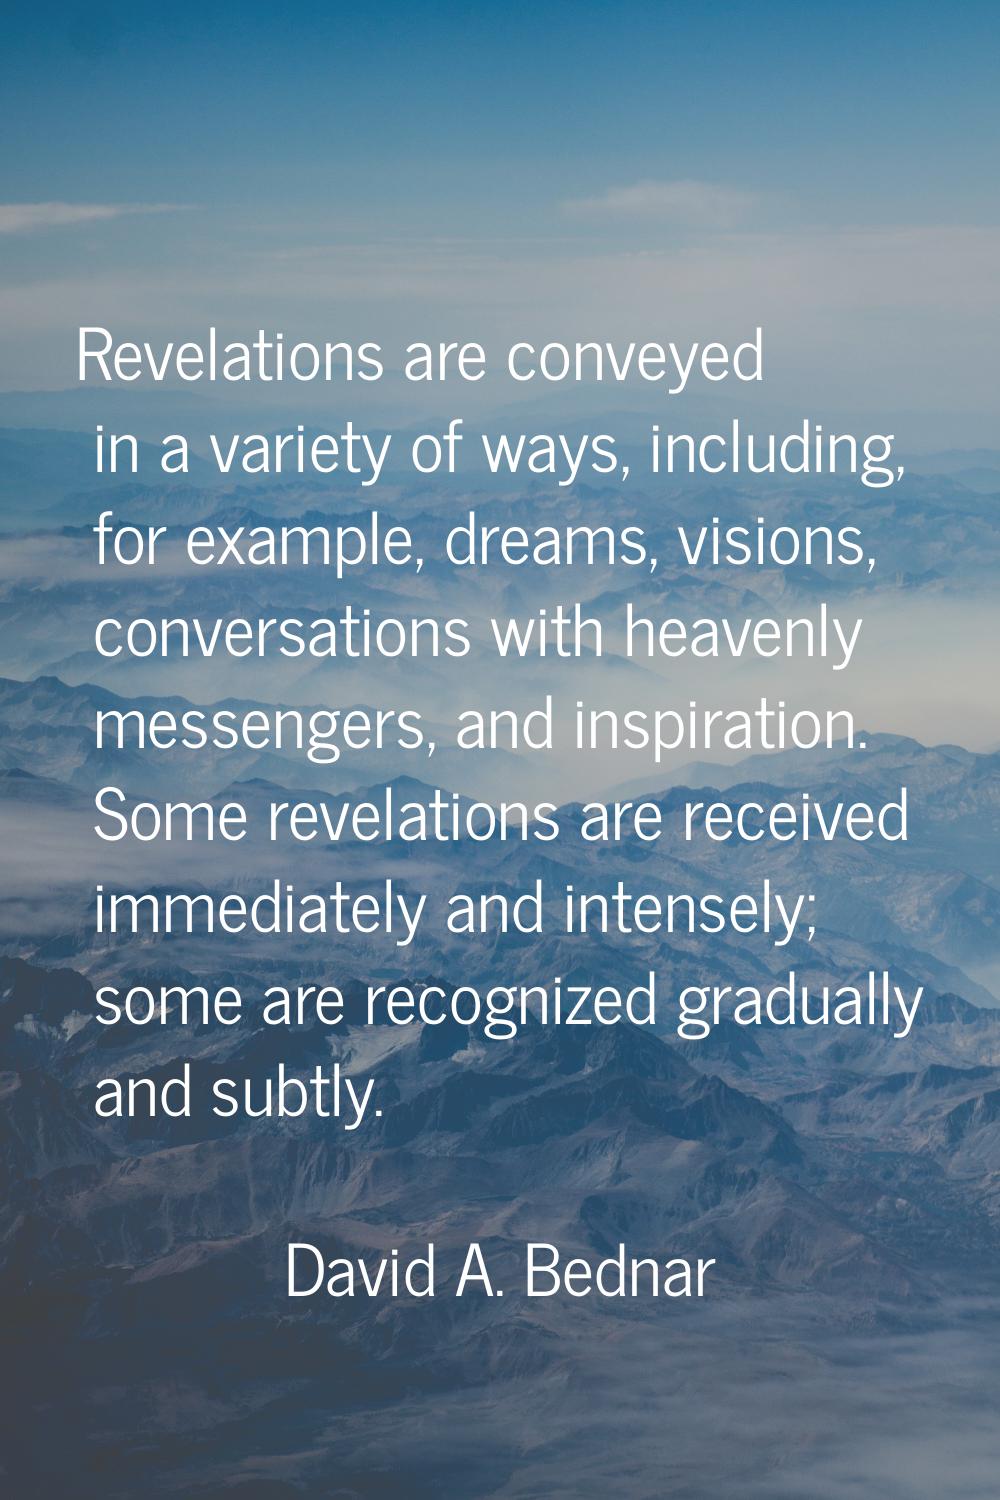 Revelations are conveyed in a variety of ways, including, for example, dreams, visions, conversatio